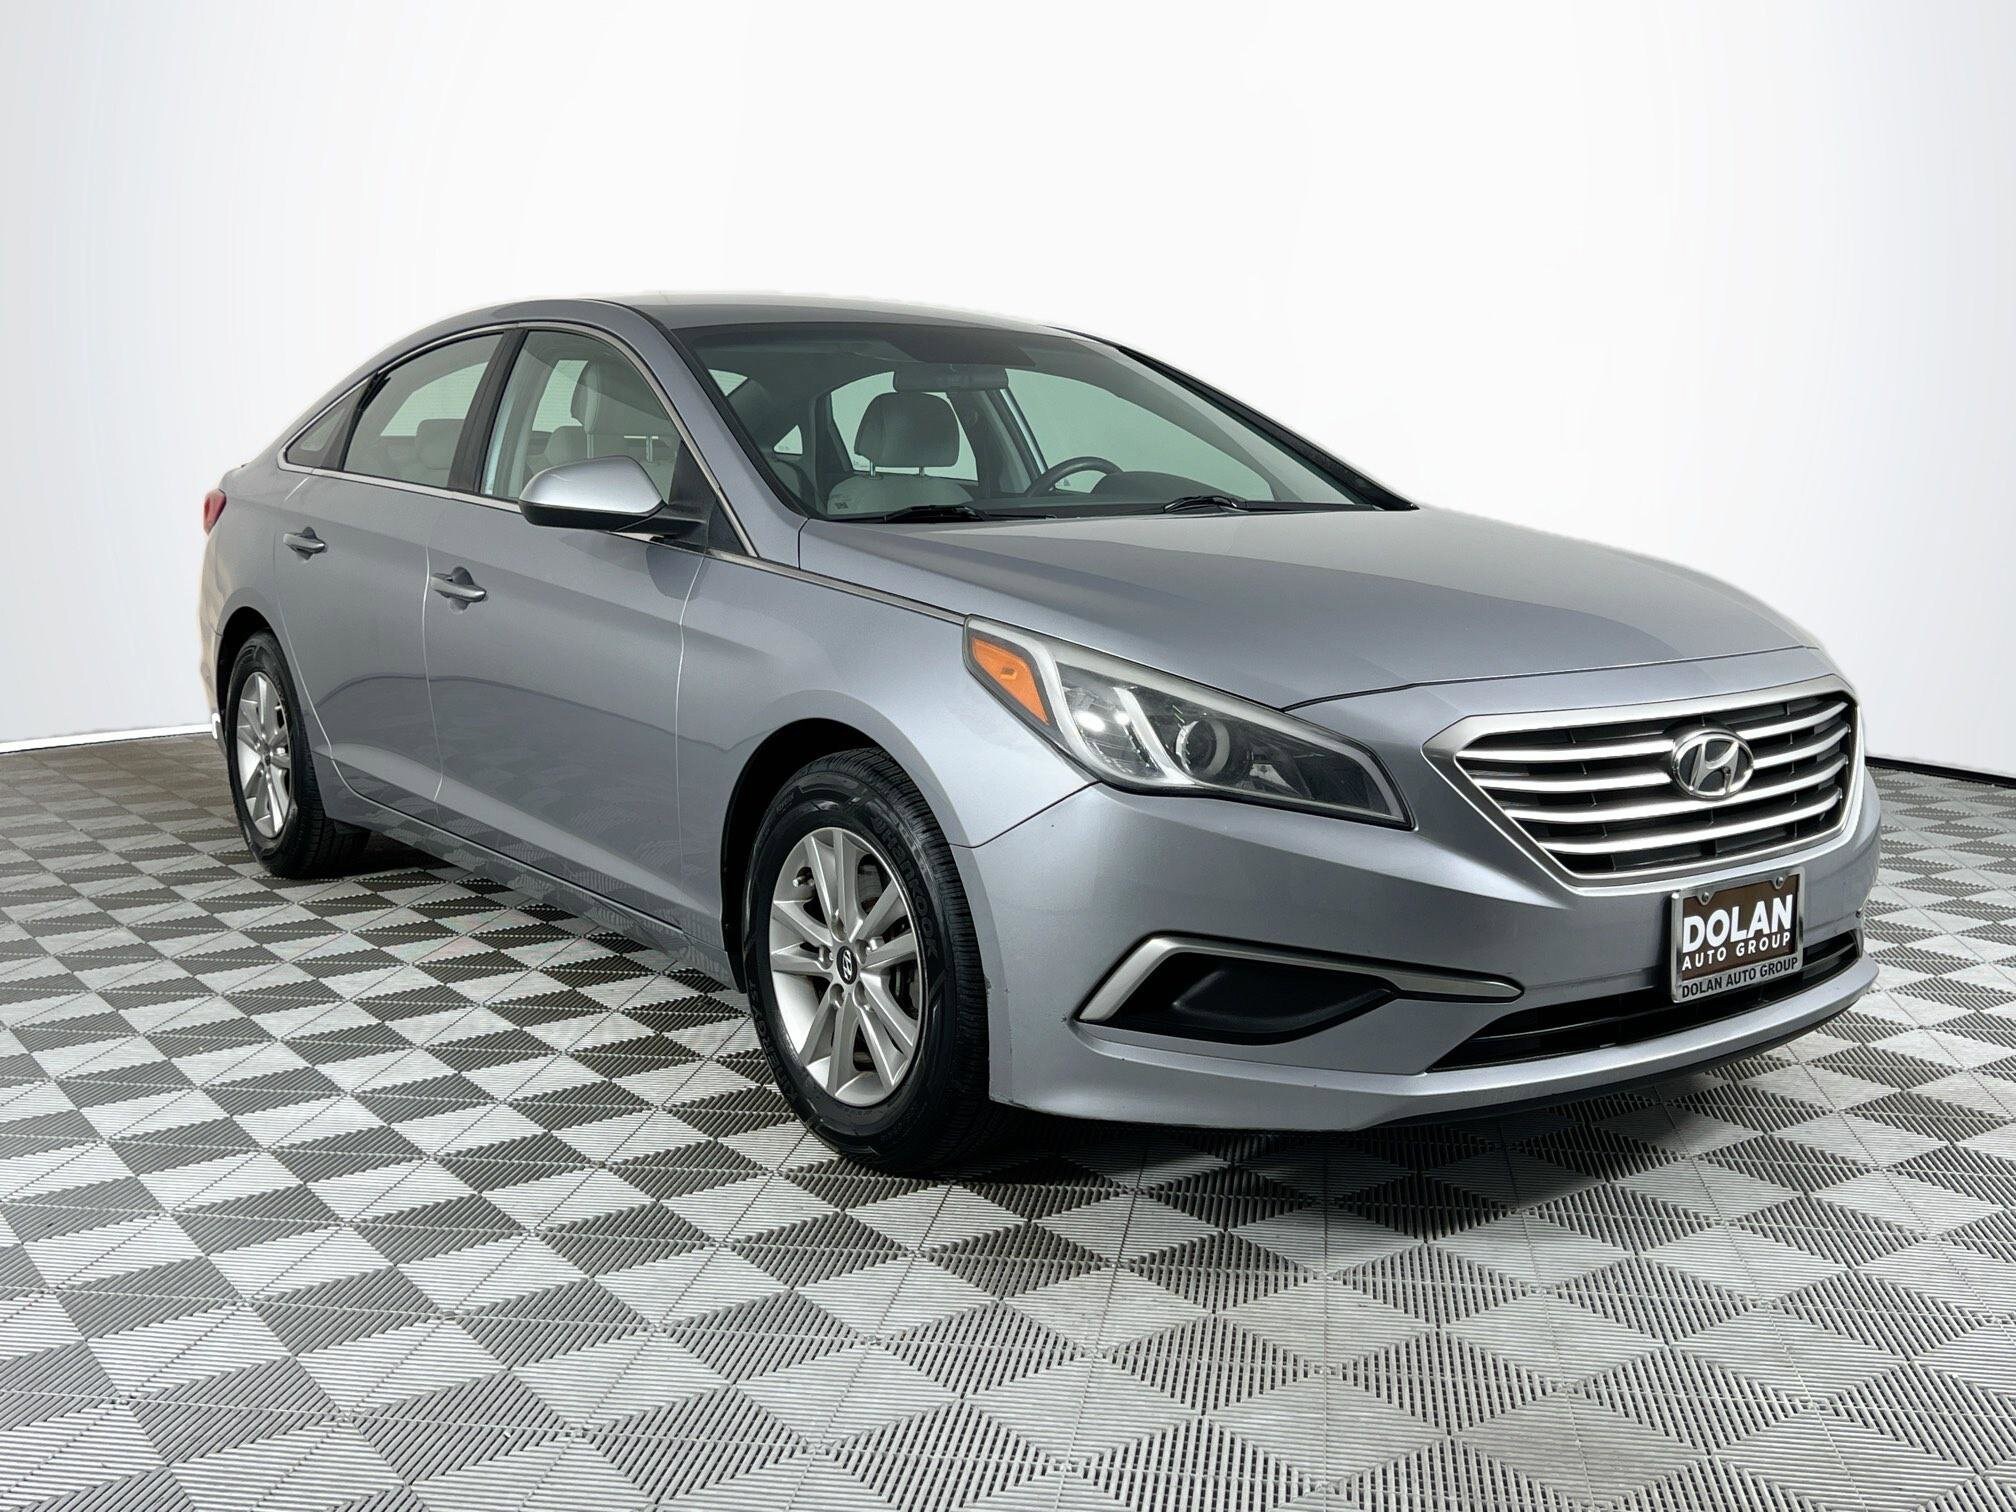 Used 2017 Hyundai Sonata SE with VIN 5NPE24AF8HH533206 for sale in Reno, NV